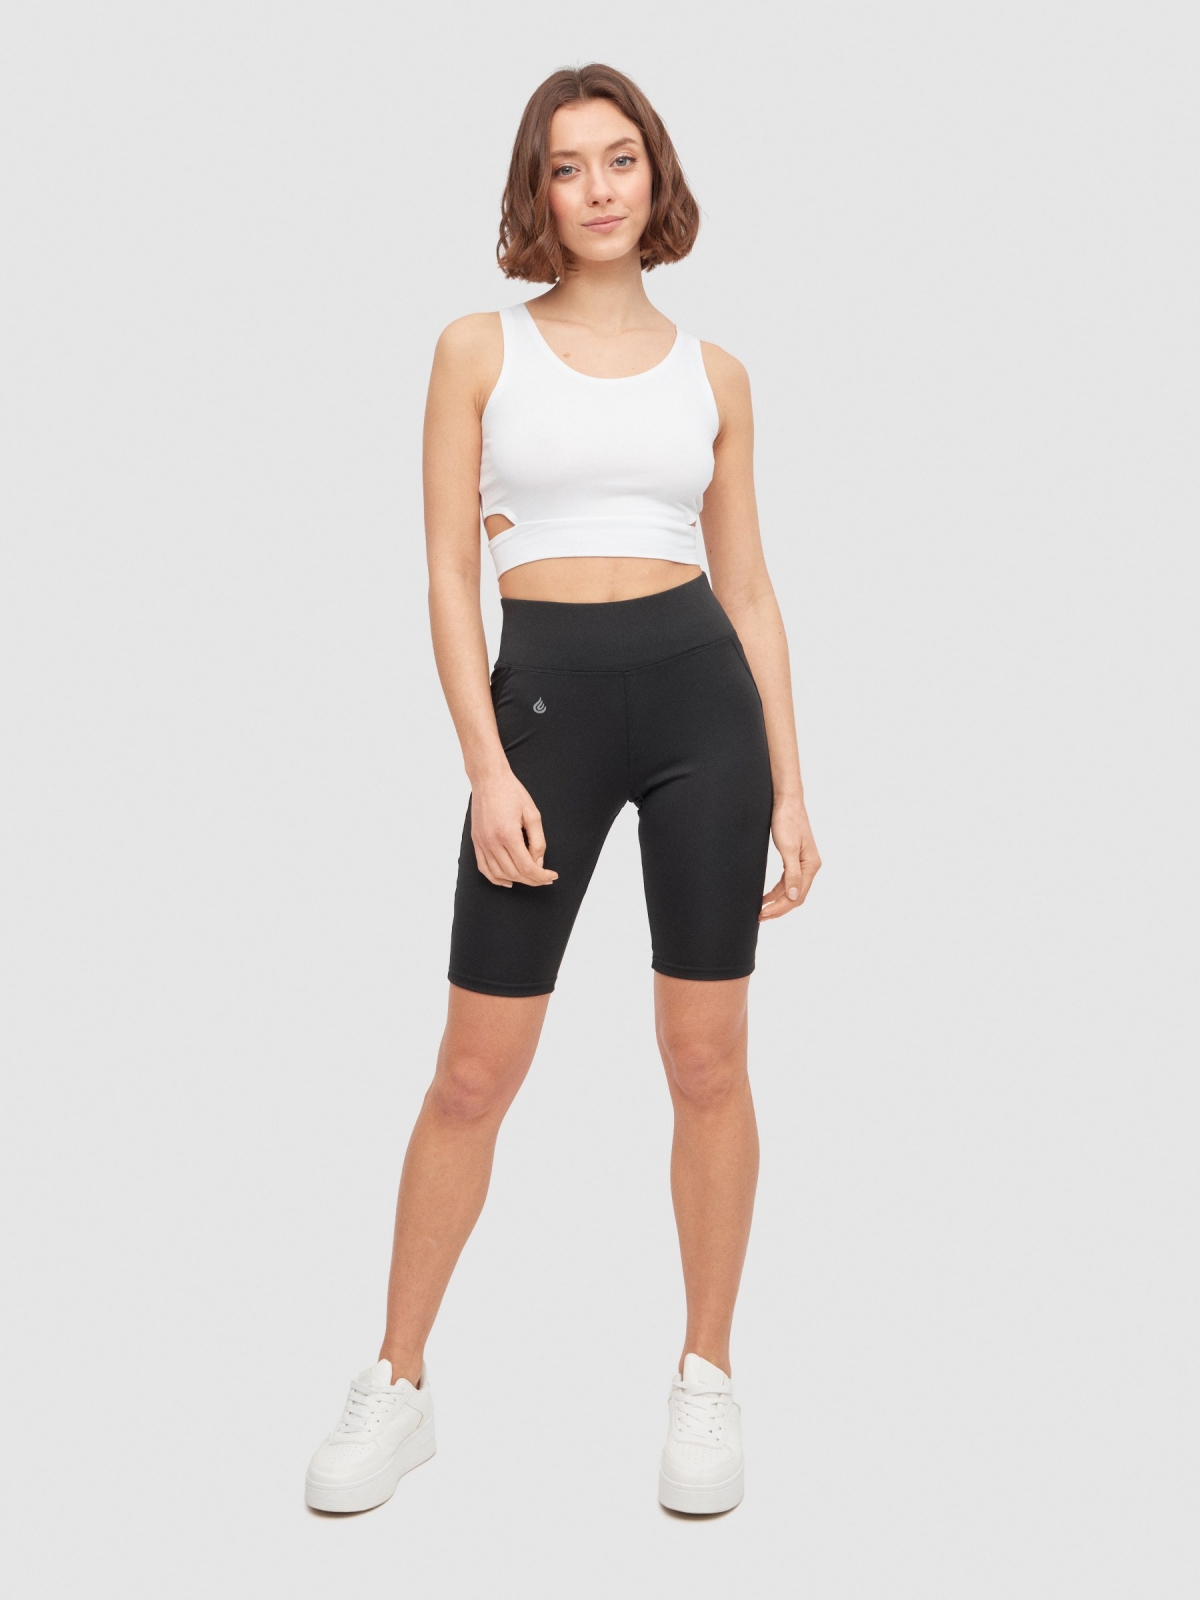 Basic cycling leggings black middle back view